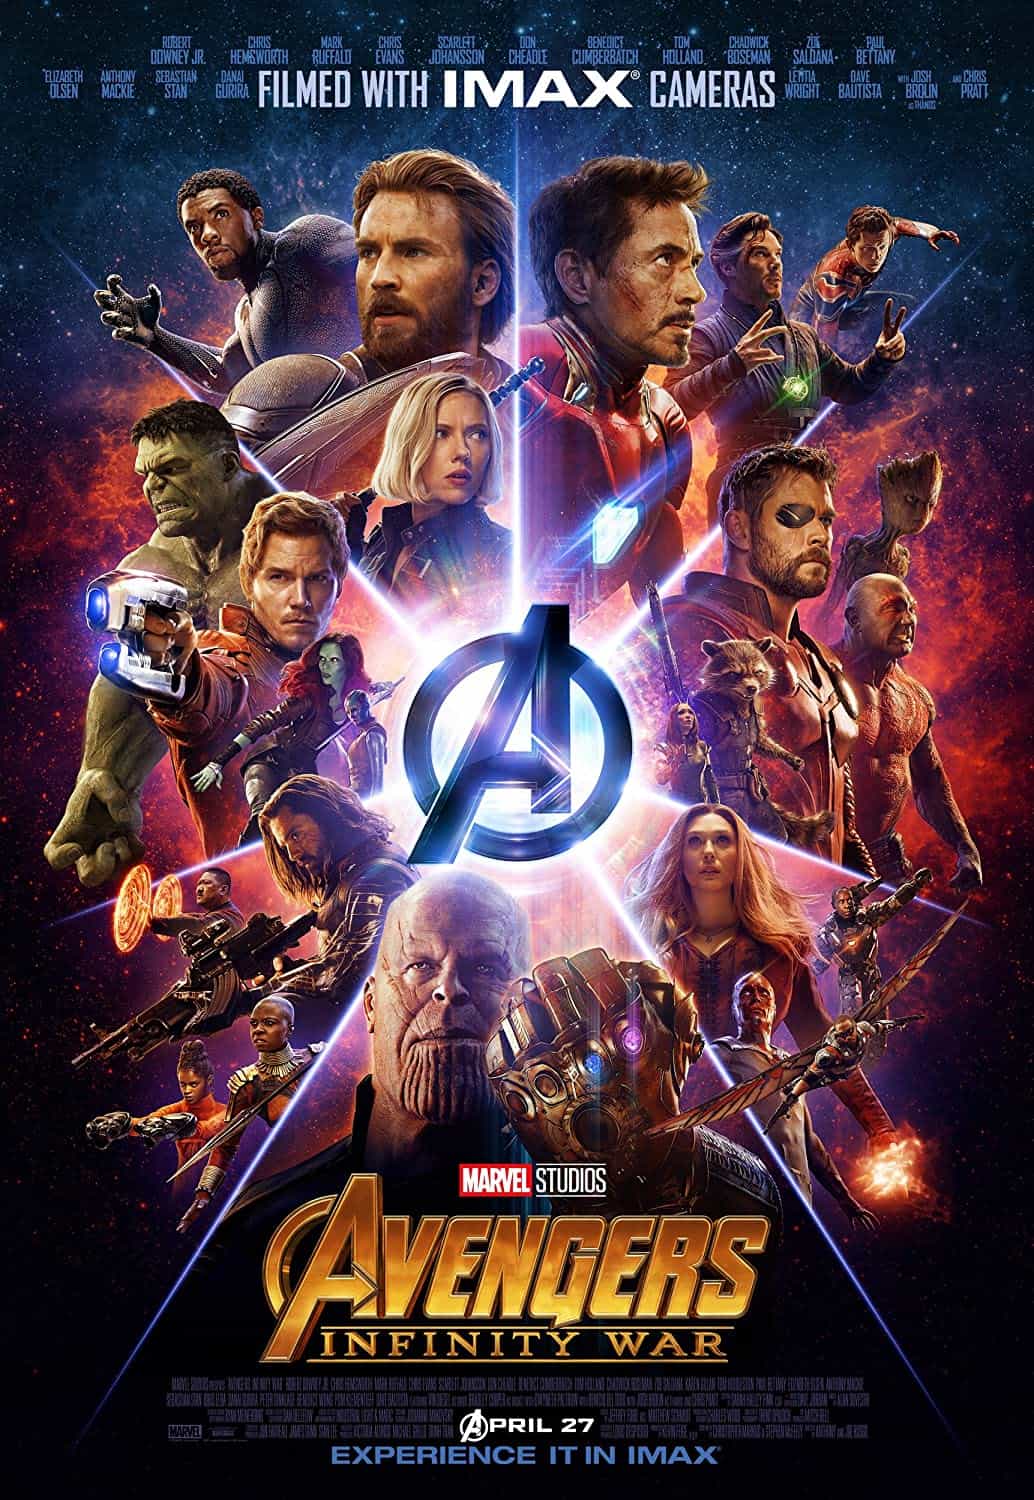 Avengers: Infinity War 2018 Tamil Dubbed Sci-Fi Movie Online